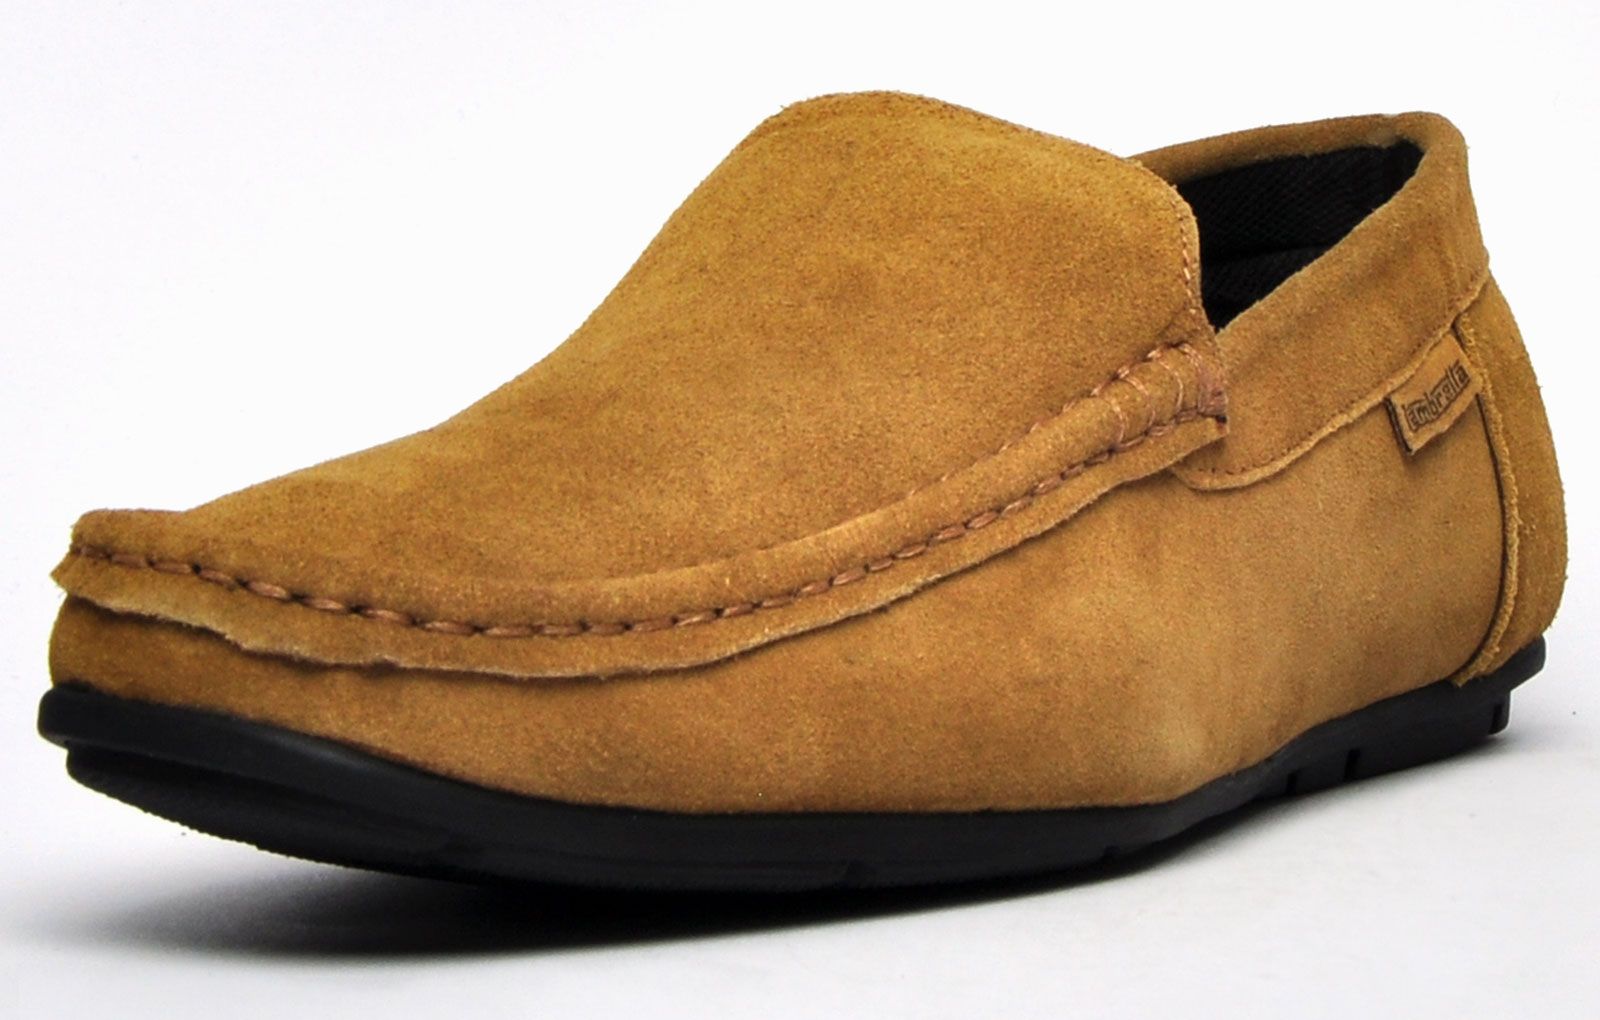 Classic and effective the classy design of these Lambretta Quad suede leather slip on loafers allow you to create effortless style no matter what the occasion. Presented in a soft suede leather upper and detailed with a clean cut and designer stitch detailing, these high end dress shoes exert charm for a quirky, dapper finish, a must have addition to any wardrobe. The quality suede leather upper sits on a hard-wearing rubber outsole for superb durability that wont let you down wherever you go.
 -Premium suede leather upper
 -Durable rubber grip sole
 -Soft padded comfort footbed
 -Easy on/off slip on wear
 -Designer stitch detailing throughout
 -Lambretta branding